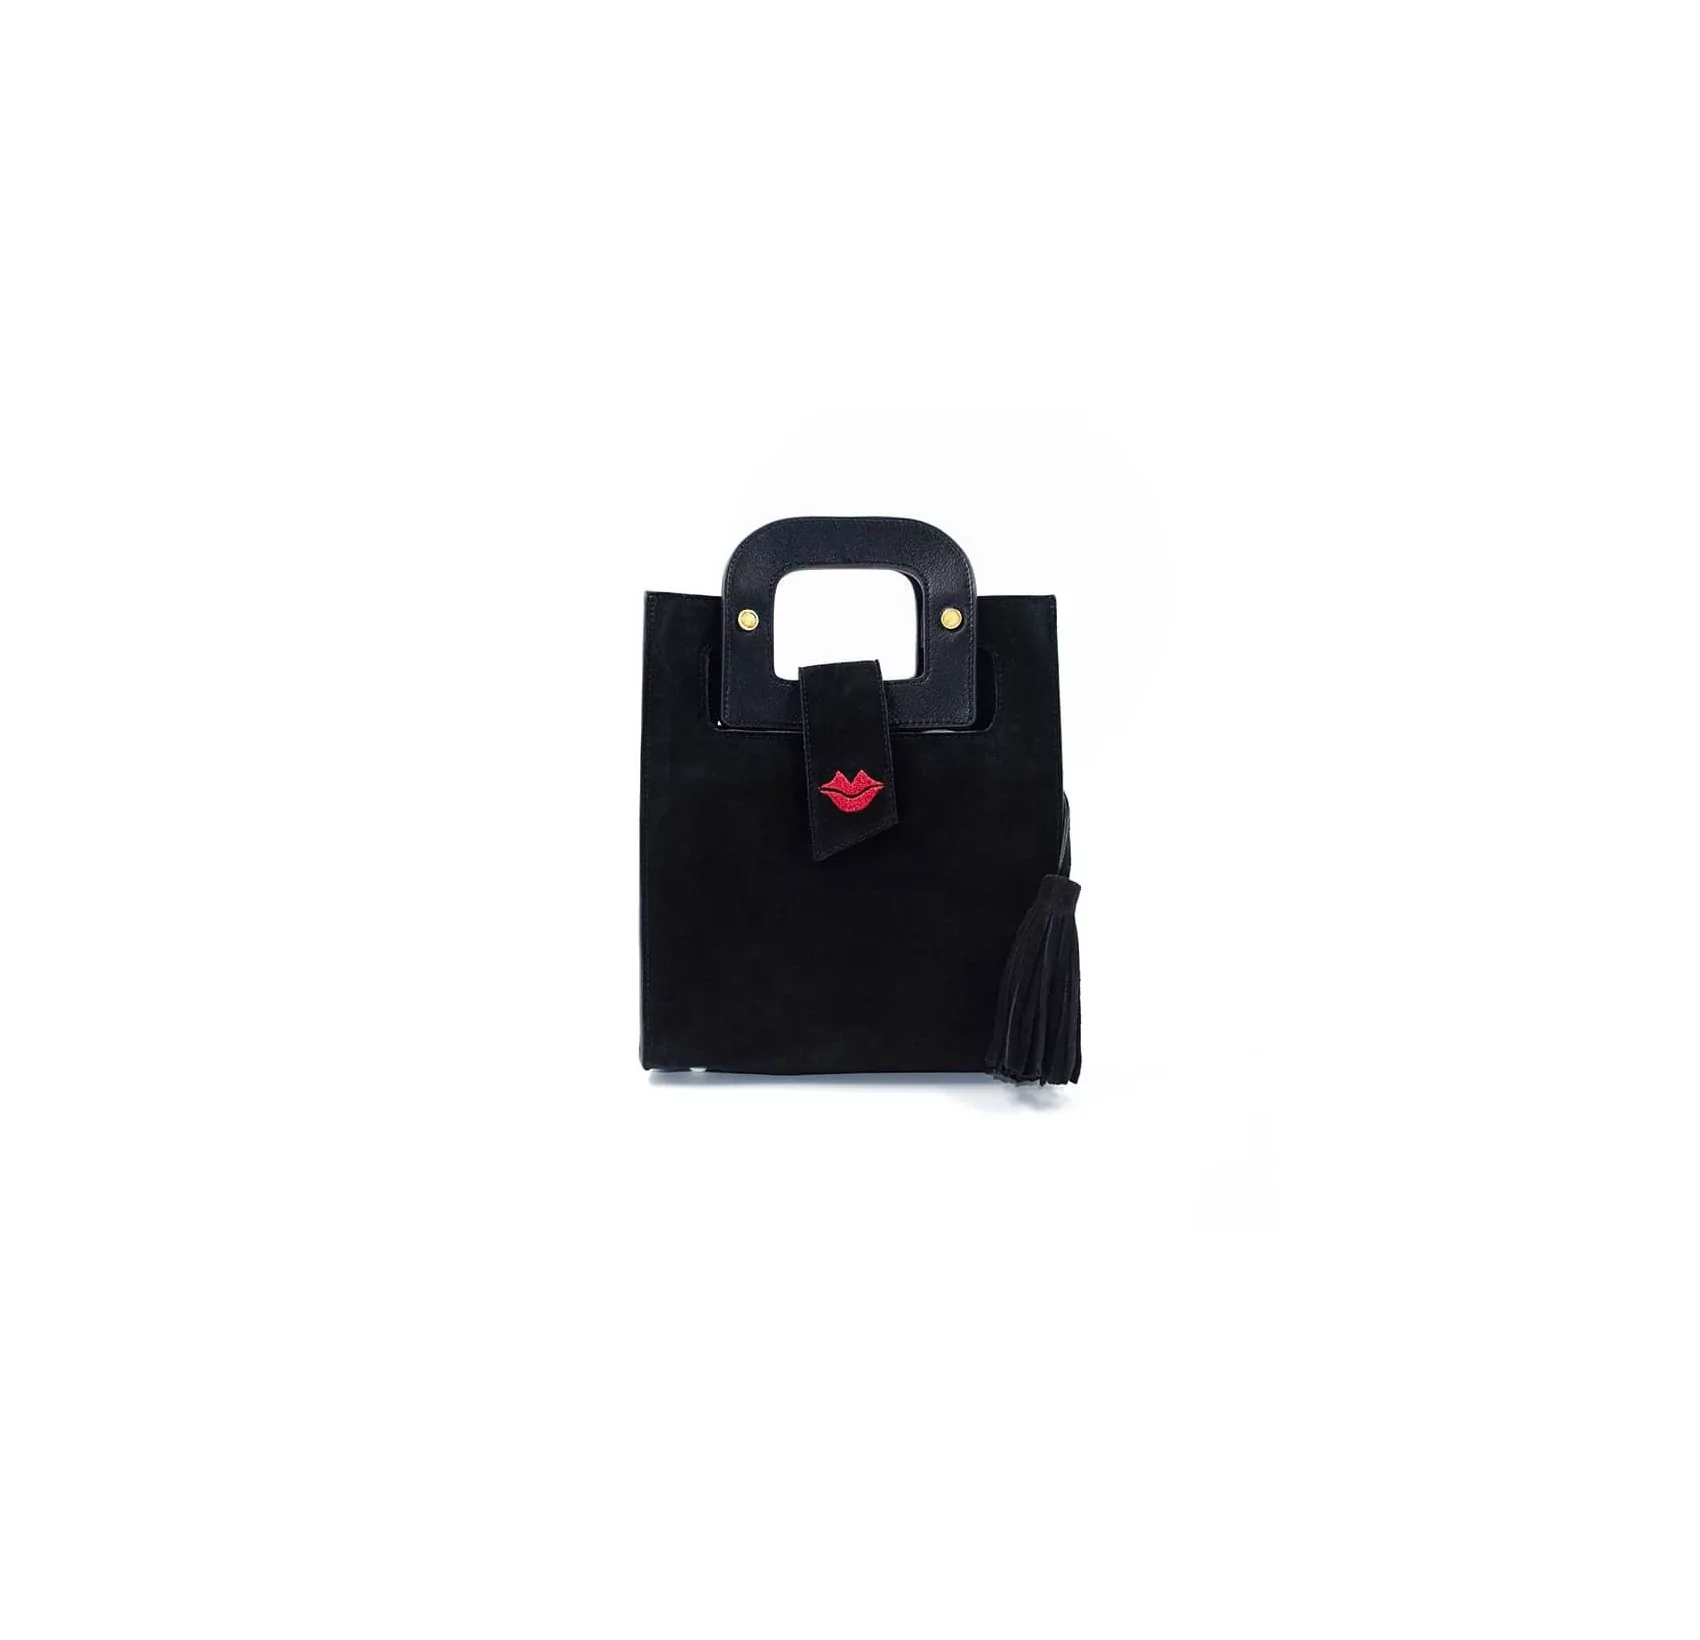 Black suede leather bag ARTISTE, red mouth embroidery |Gloria Balensi